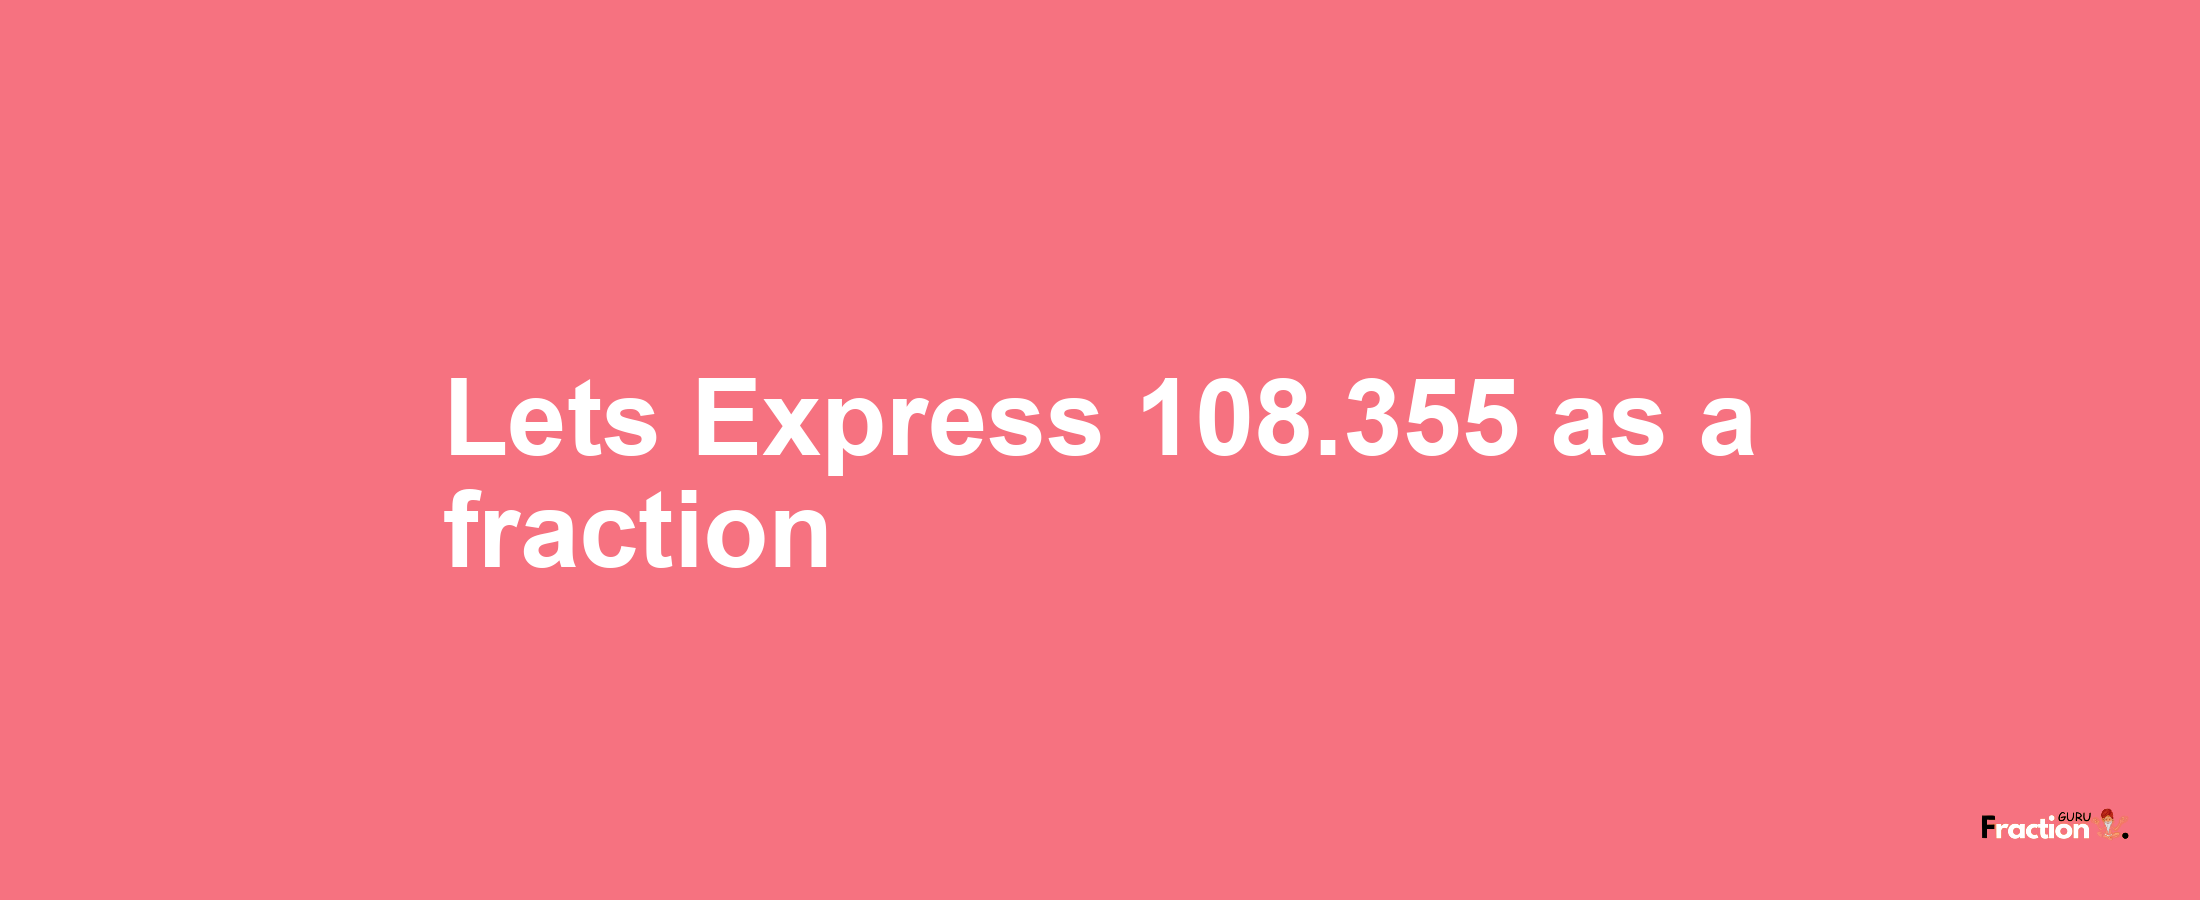 Lets Express 108.355 as afraction